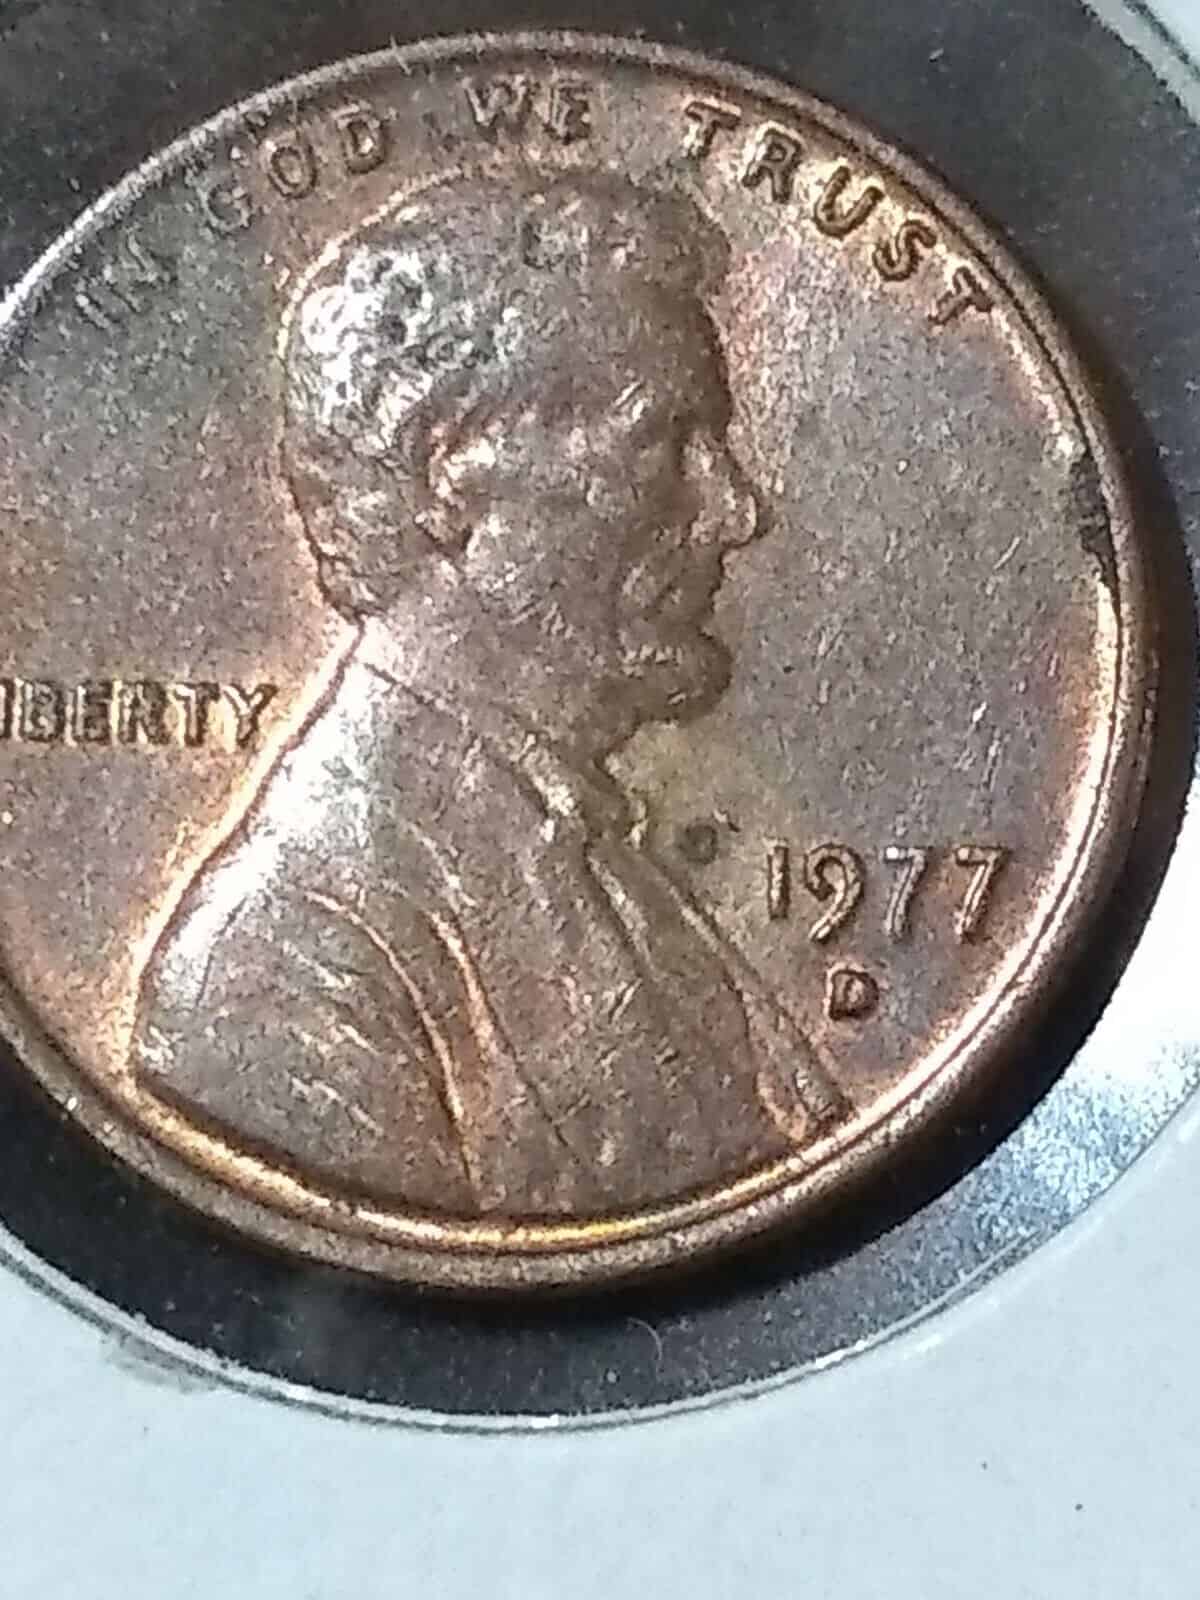 1977 Re-punched Mint Mark Pennies